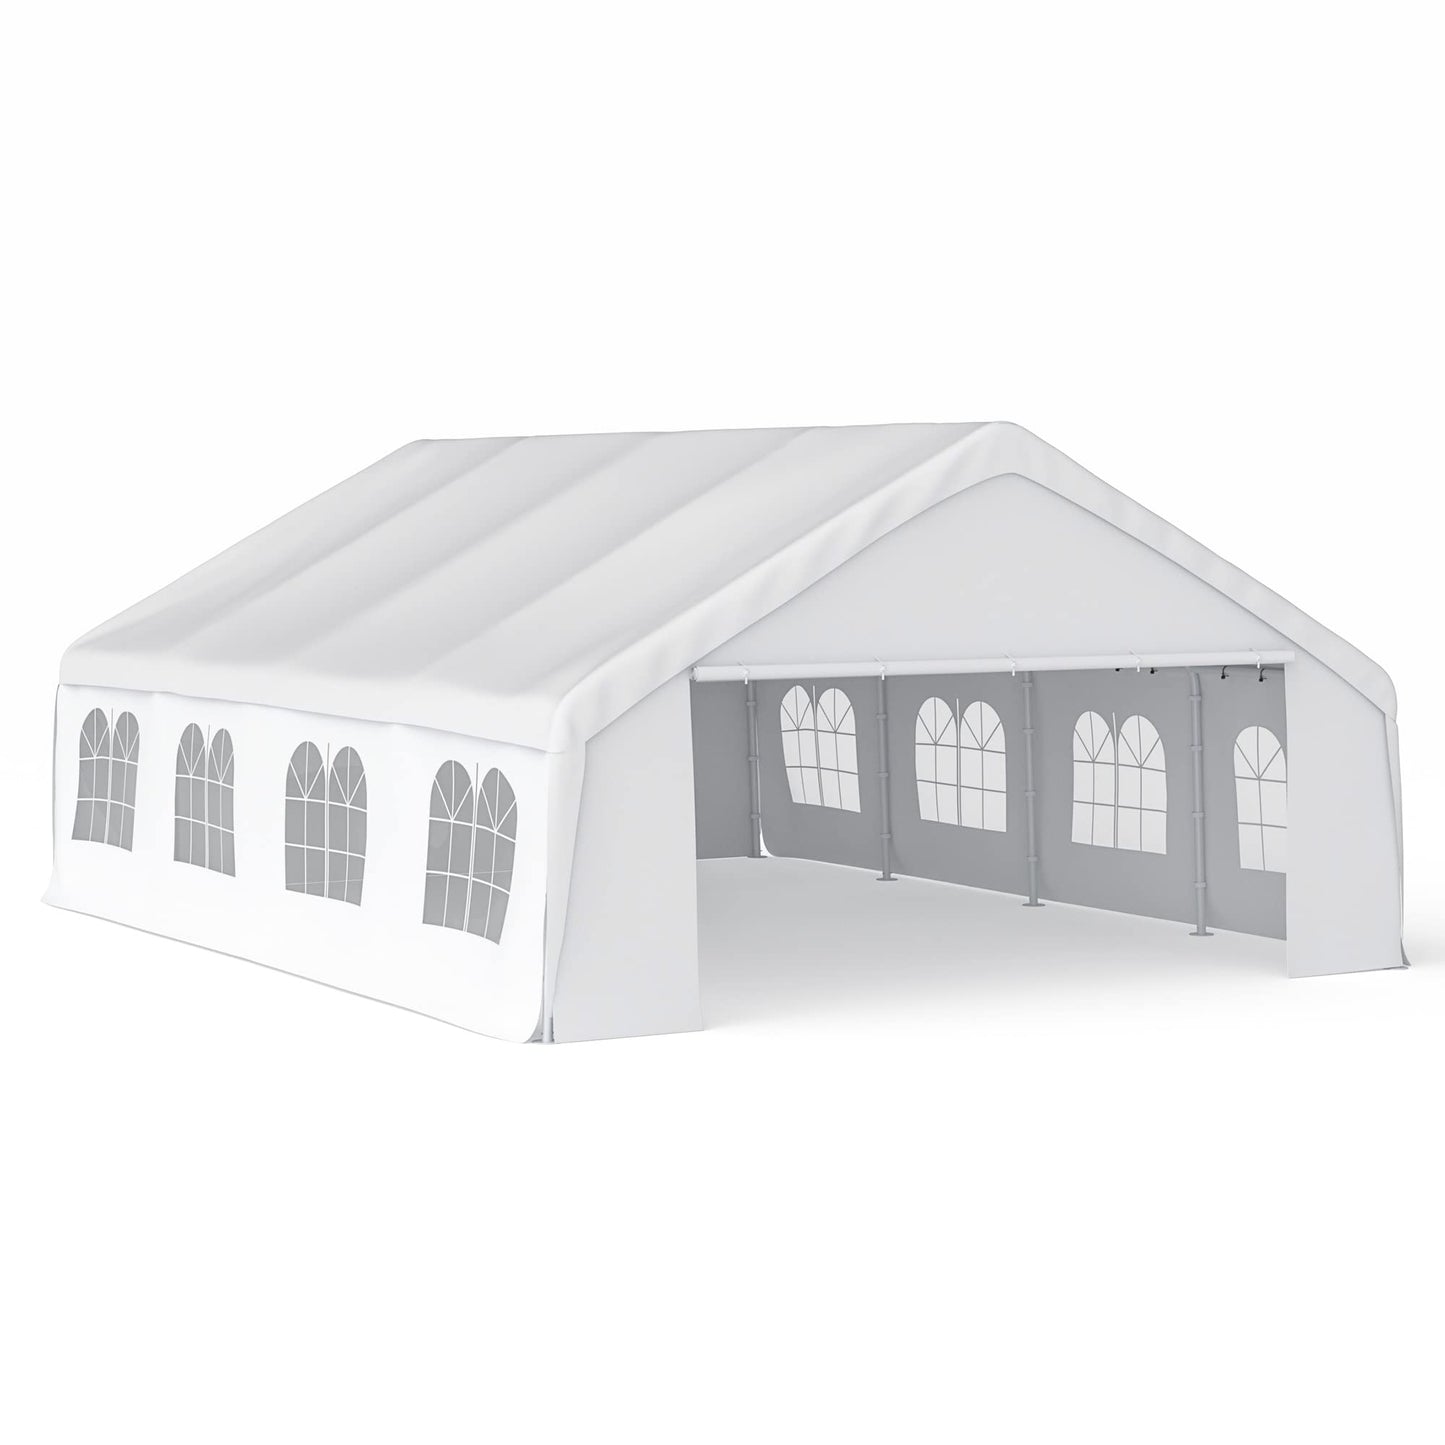 Morngardo Canopy Tent for Parties Heavy Duty 20'x26' Car Tent Metal Carport Portable Garage with Removable Sidewalls, White 20'x26'